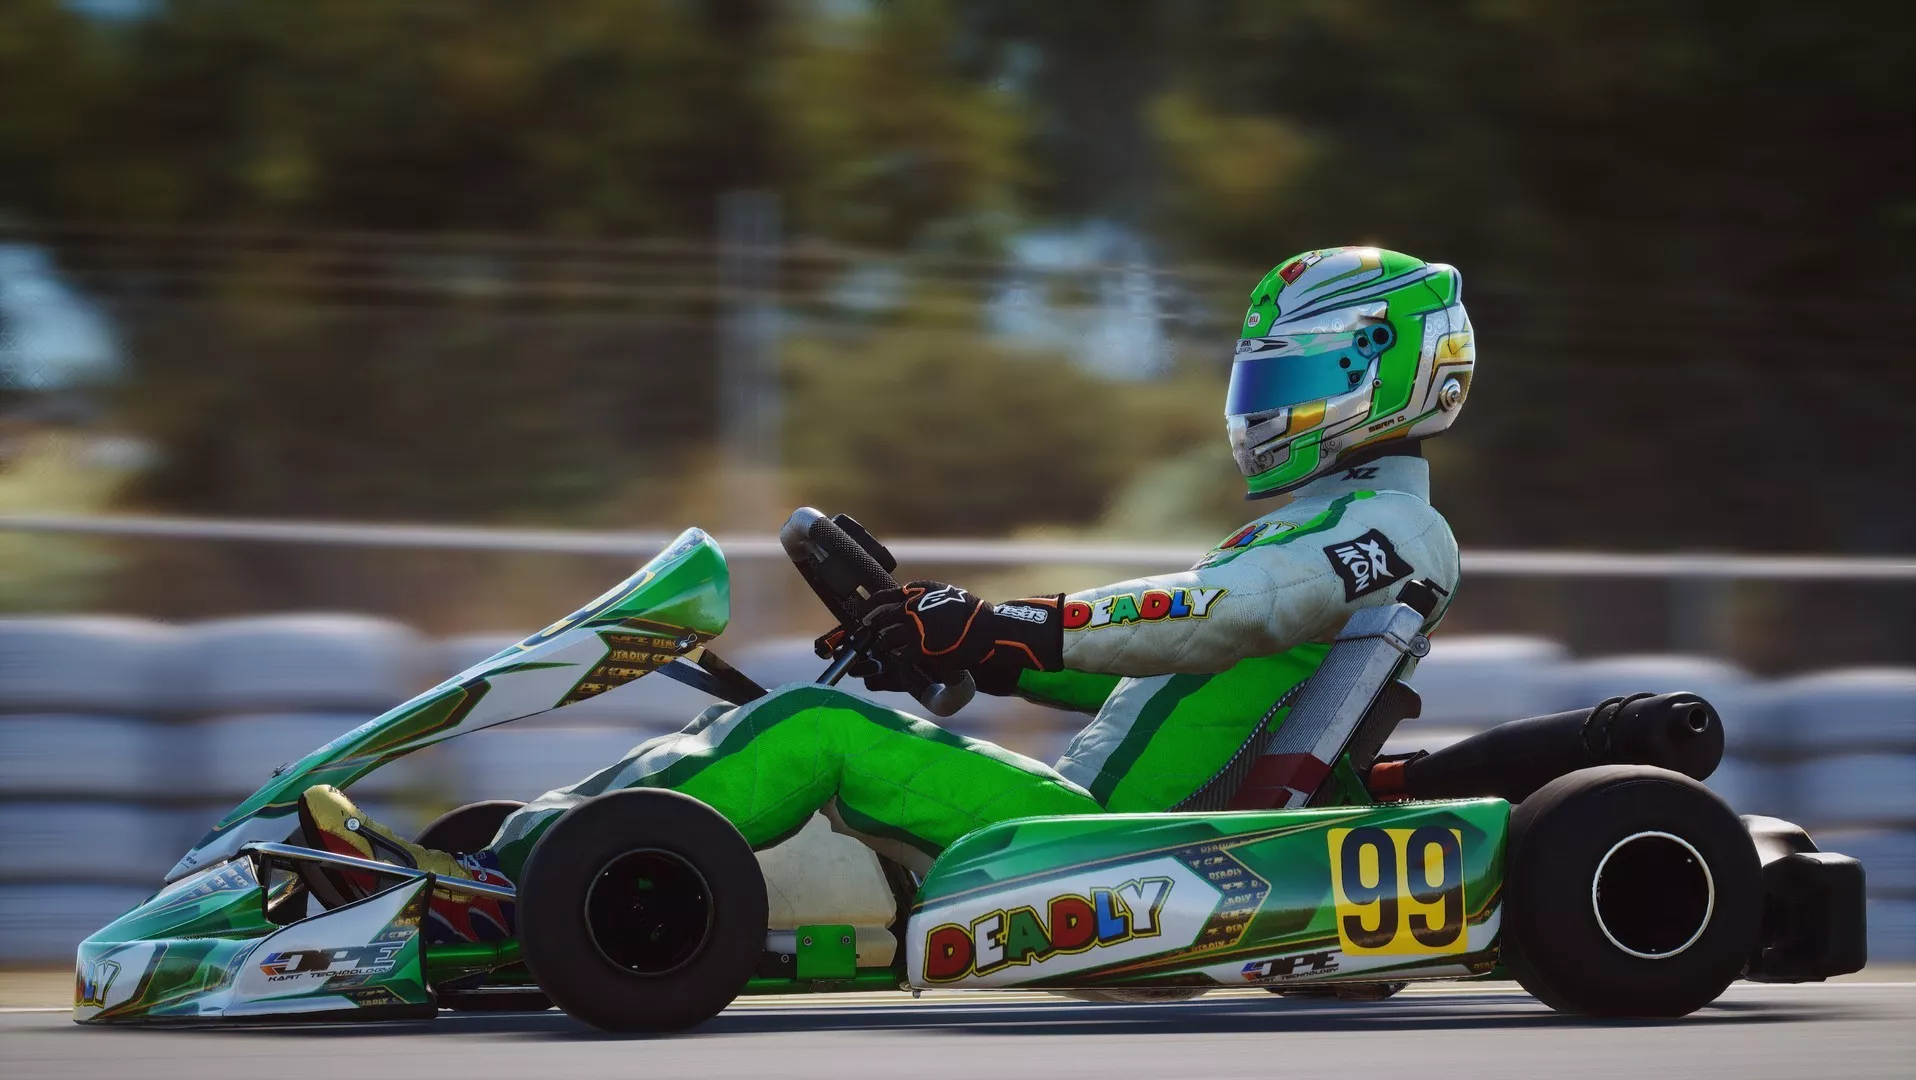 RPM Karting in Lebanon, Middle East | Karting - Rated 4.1